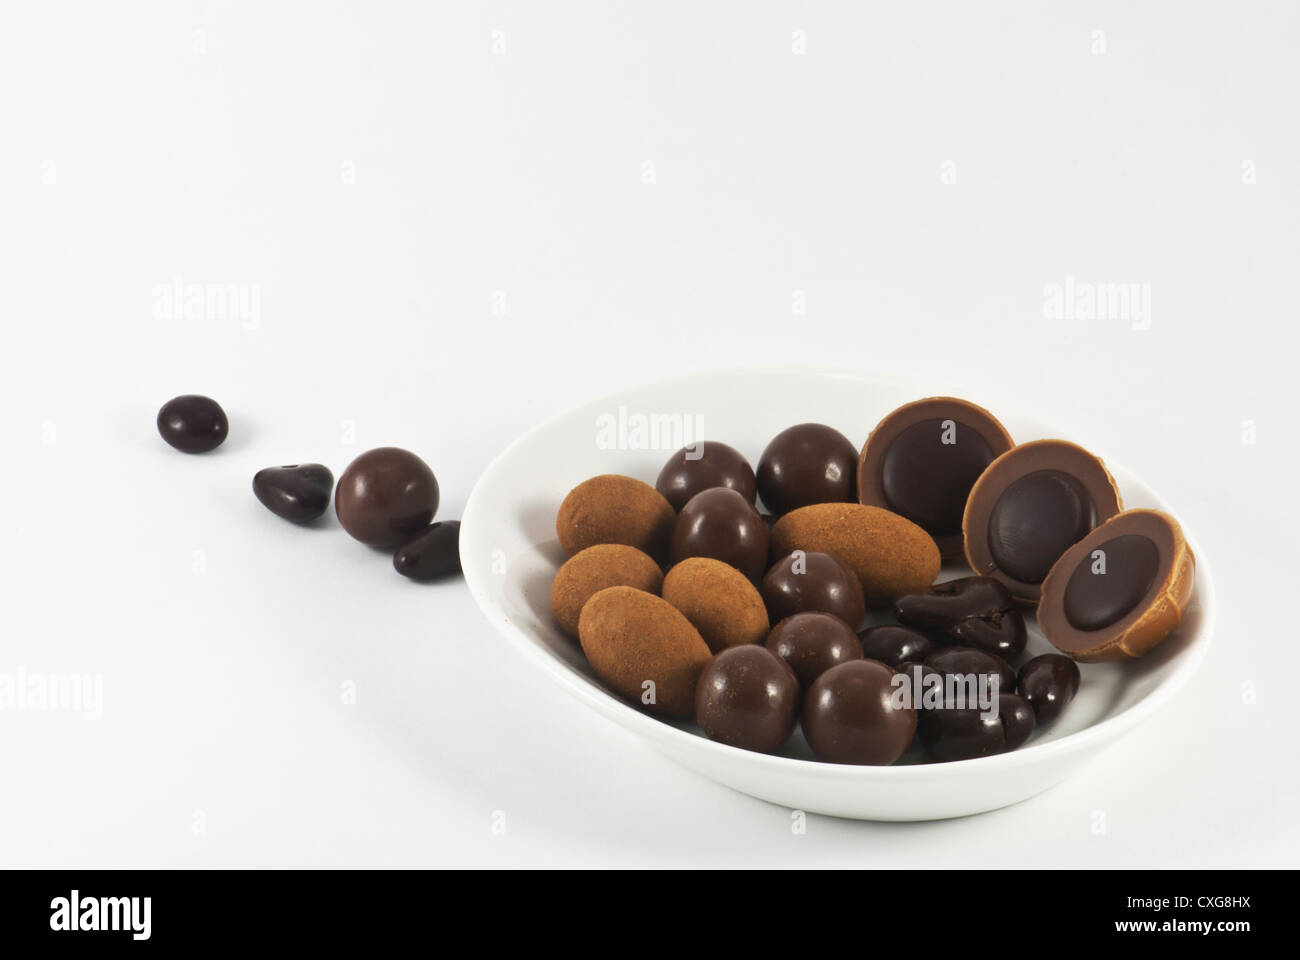 Chocolate bonbons on the white plate Stock Photo